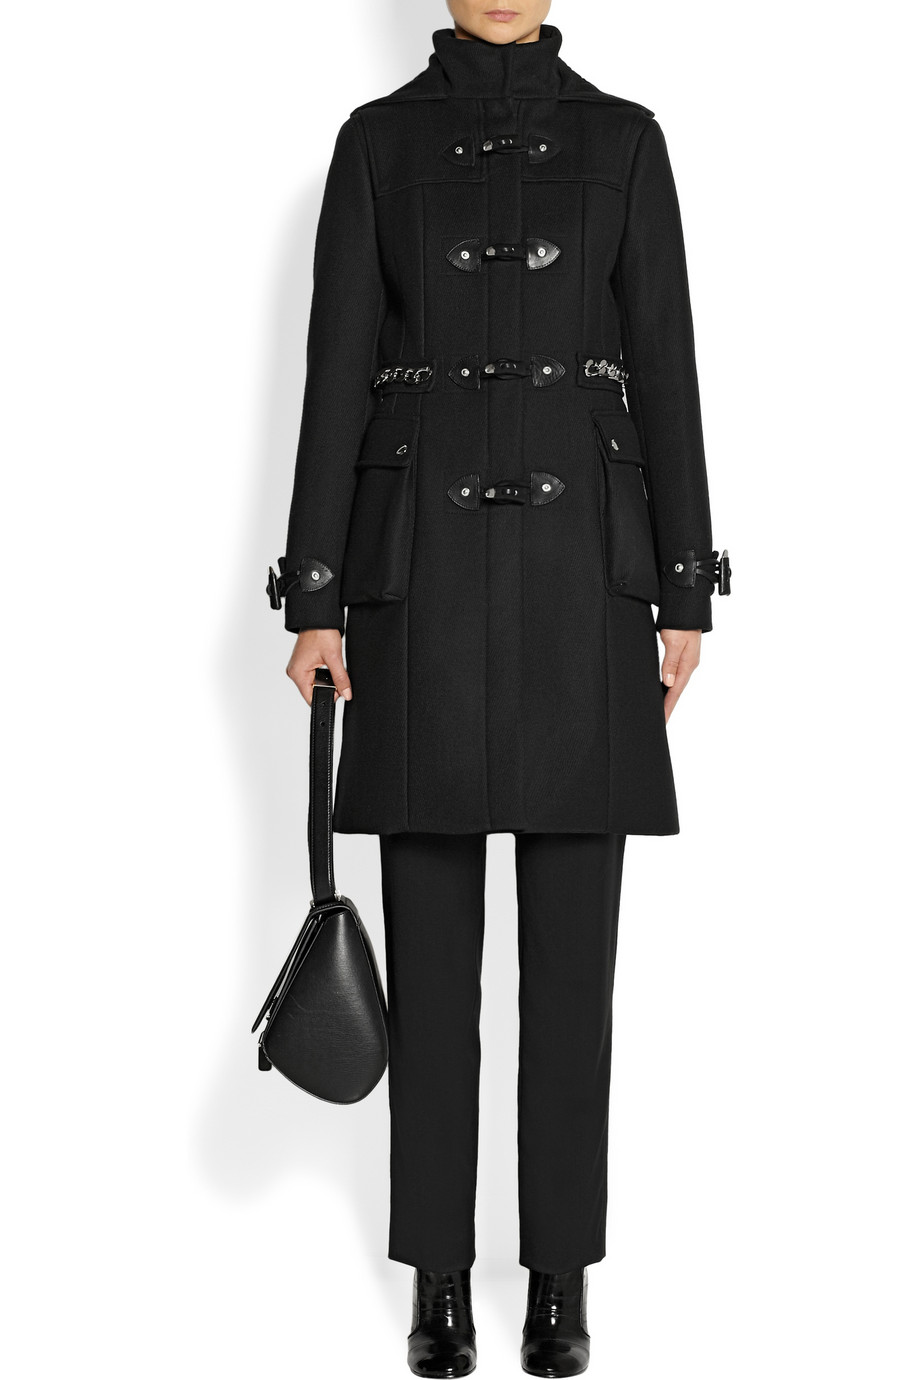 Lyst - Givenchy Black Hooded Woolblend Duffle Coat With Silver Chain ...